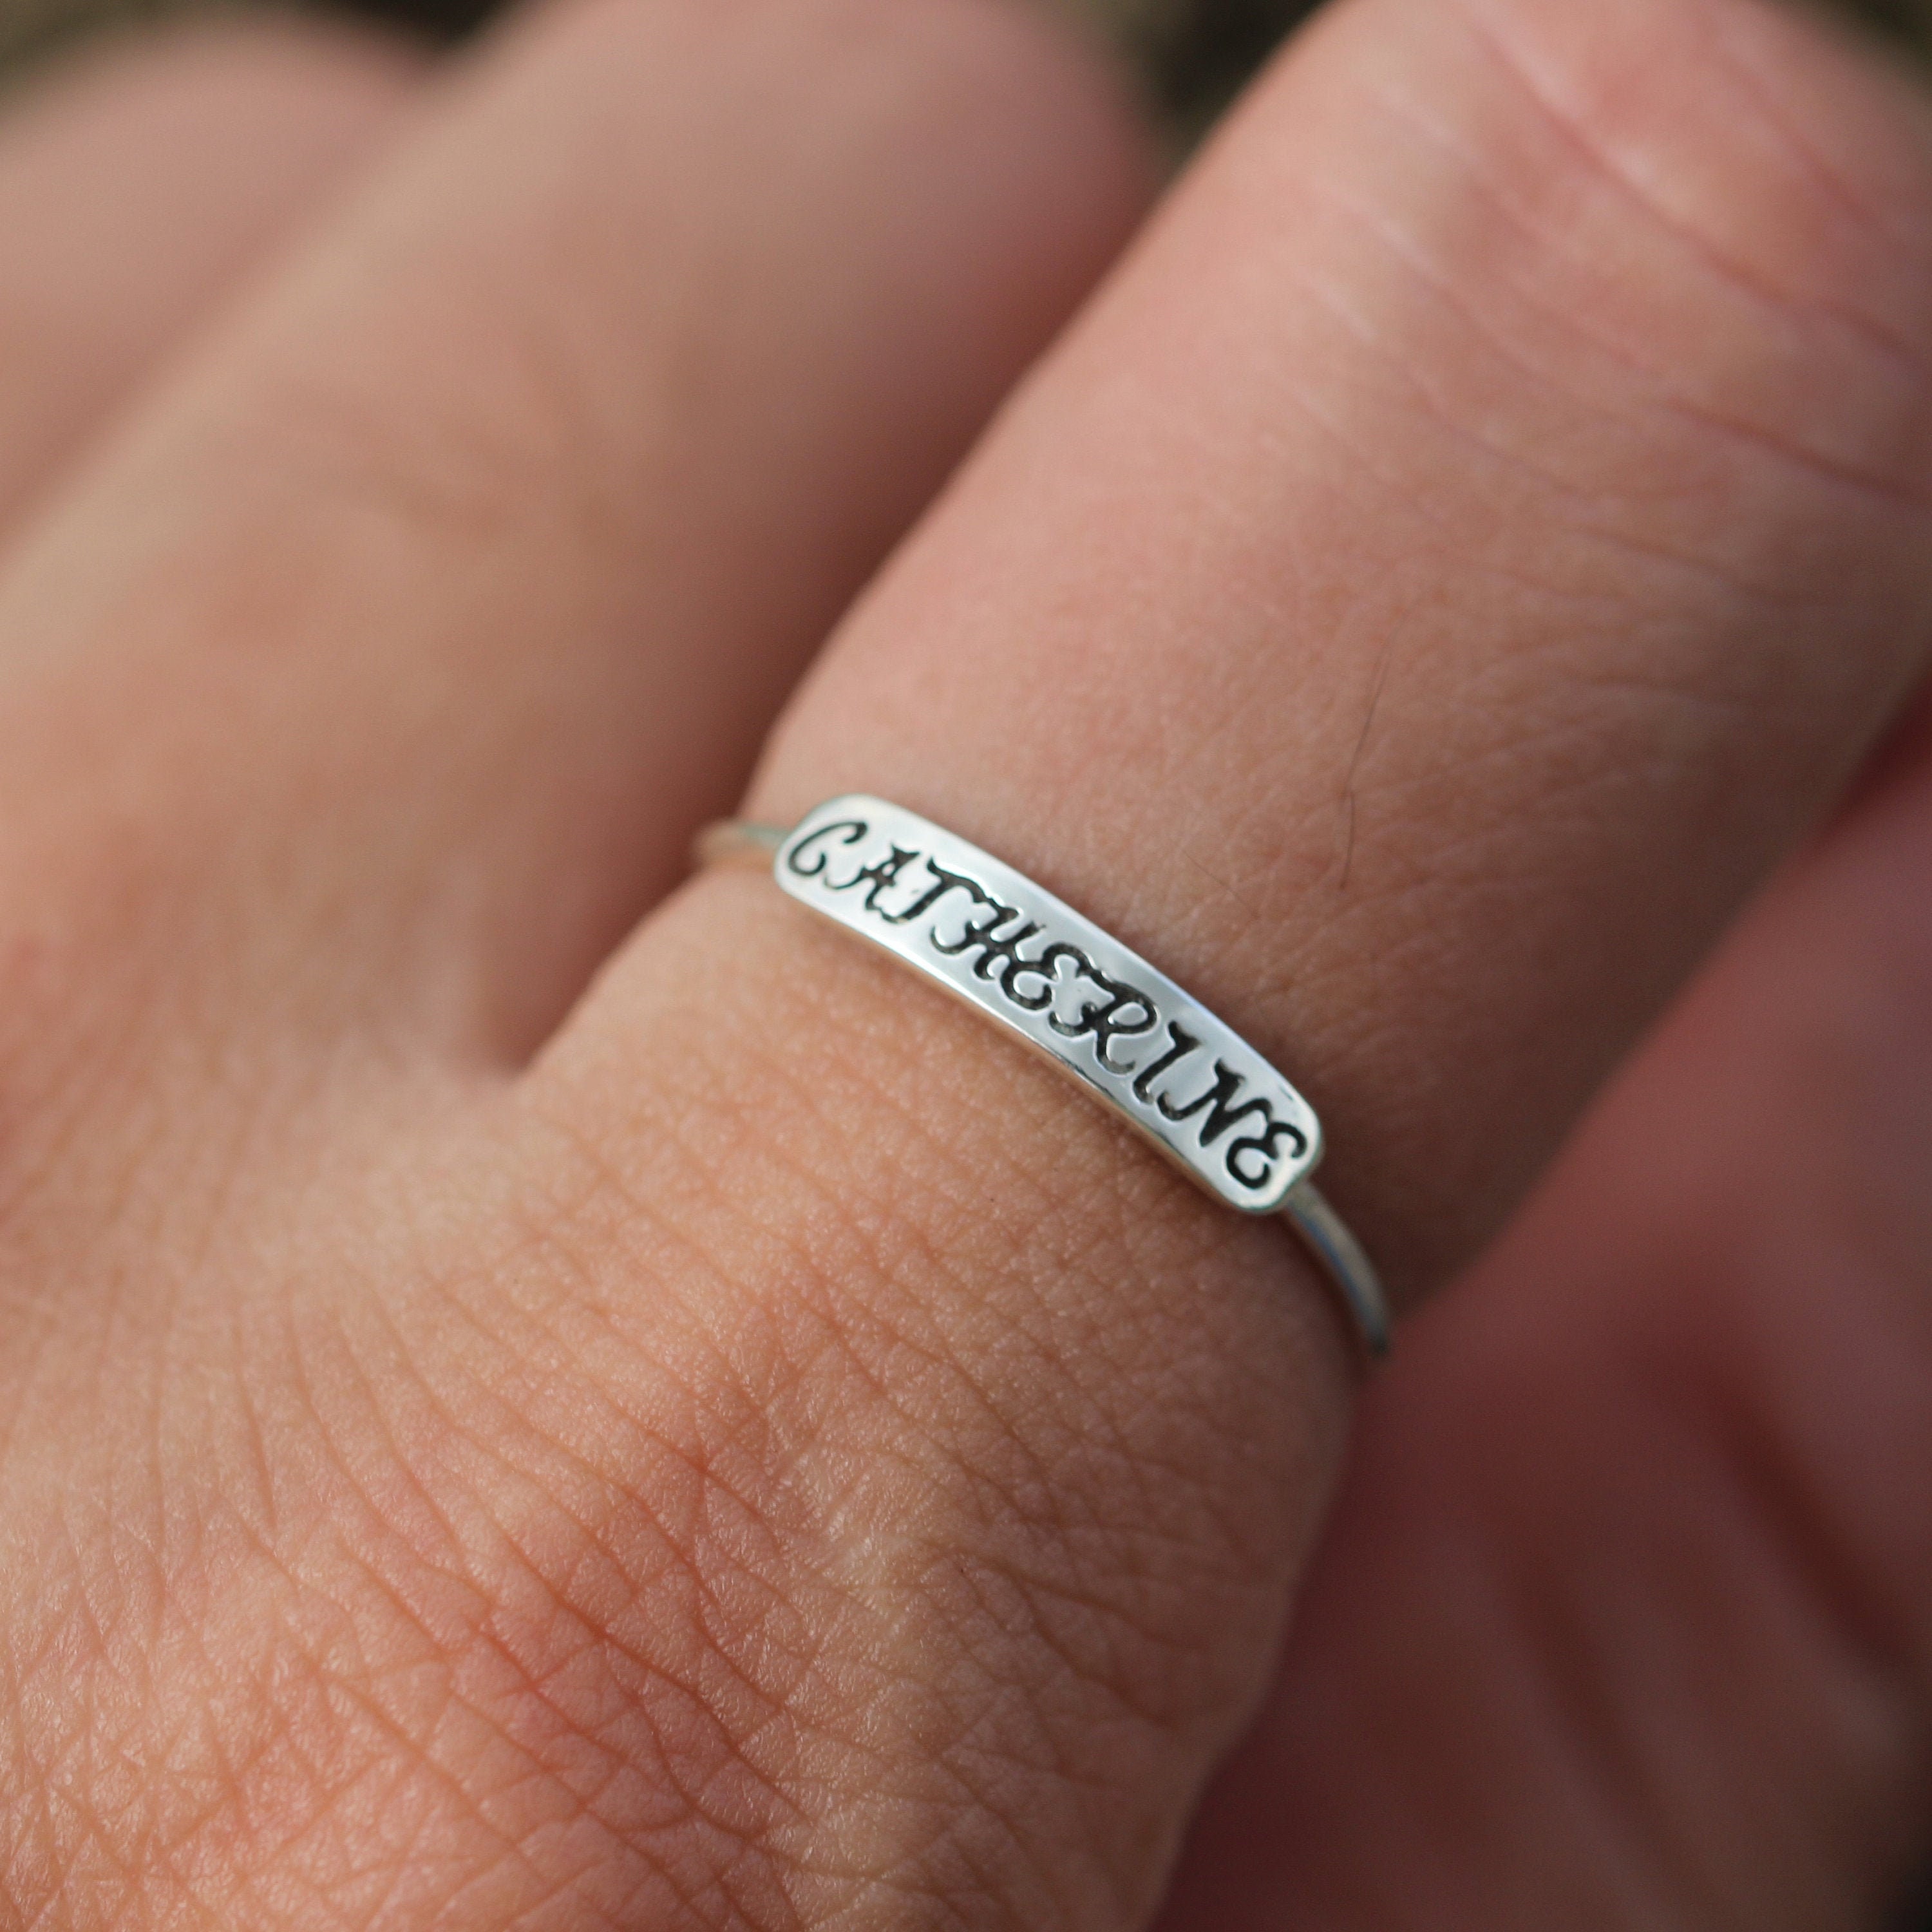 Custom Name Band Ring, Sweet Heart Engraved Ring, Personalized Stamped